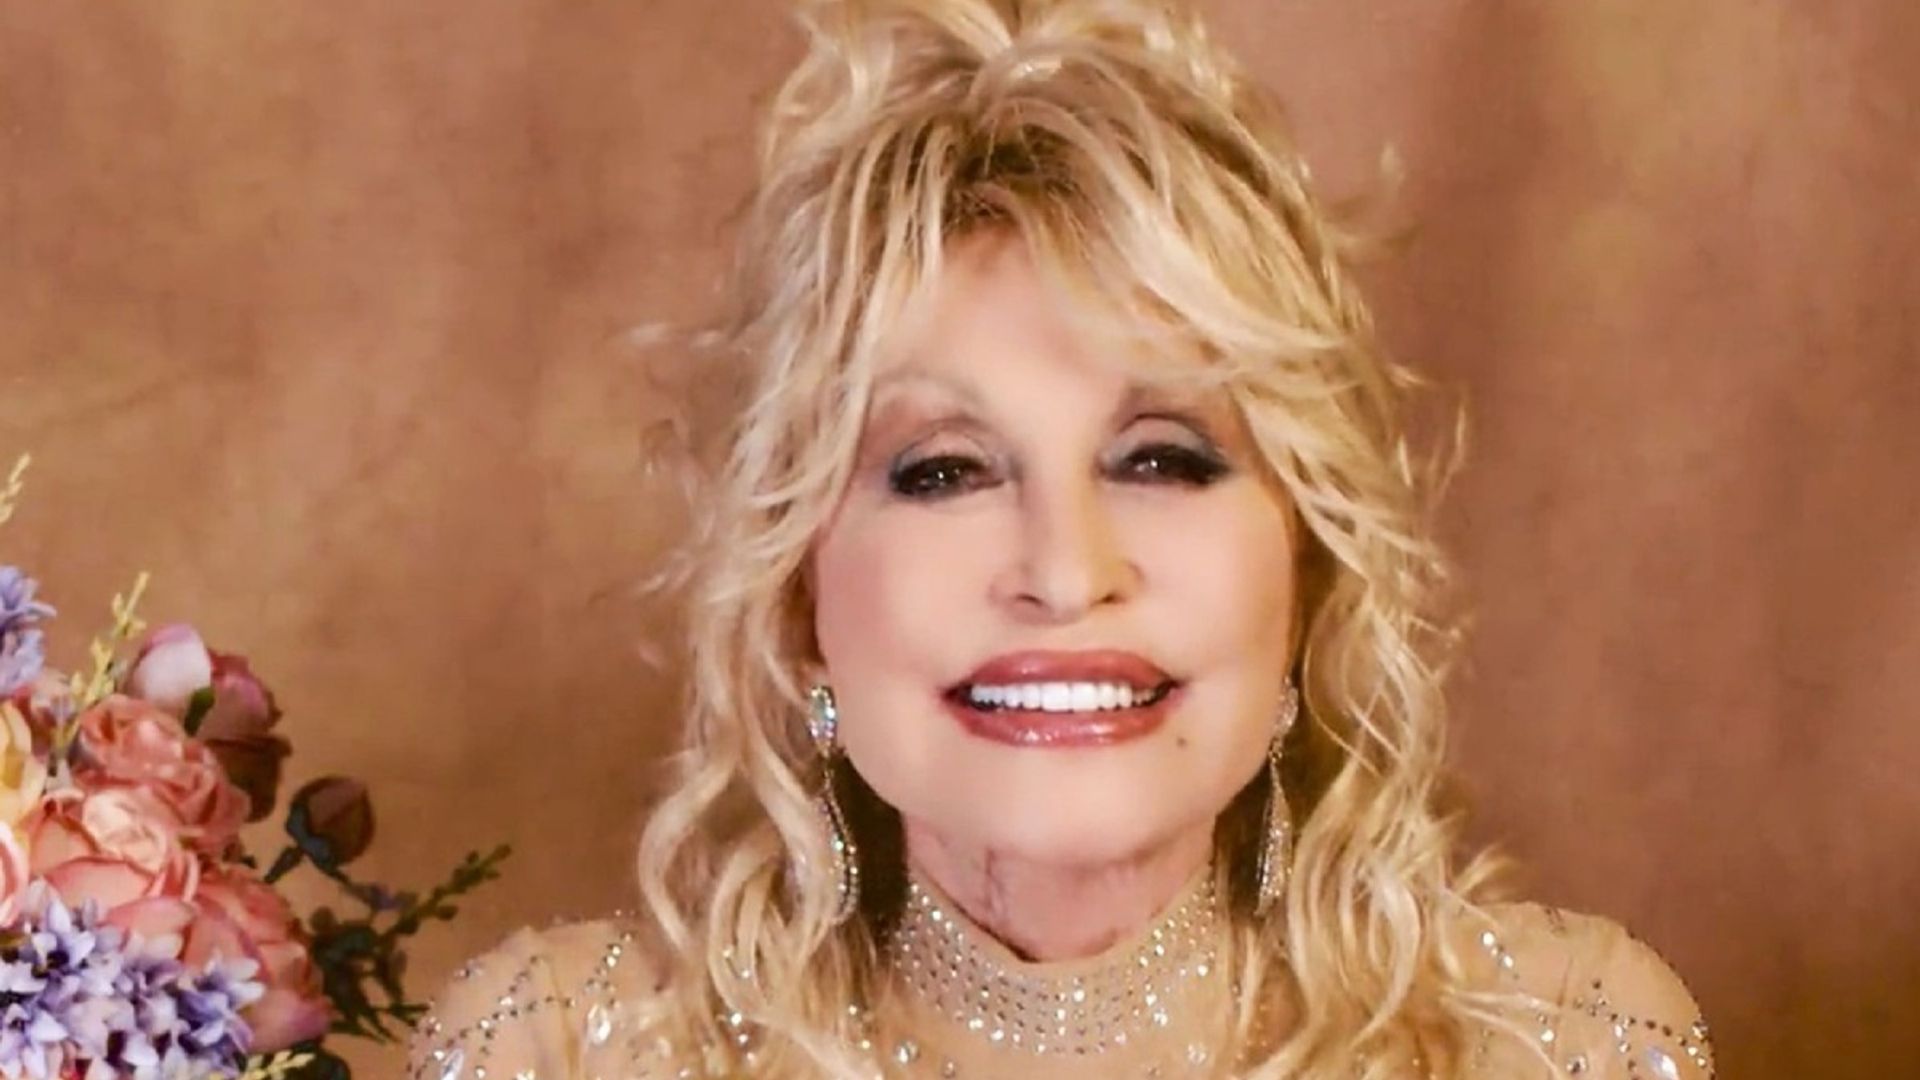 Dolly Parton and James Patterson reveal exciting new collaboration